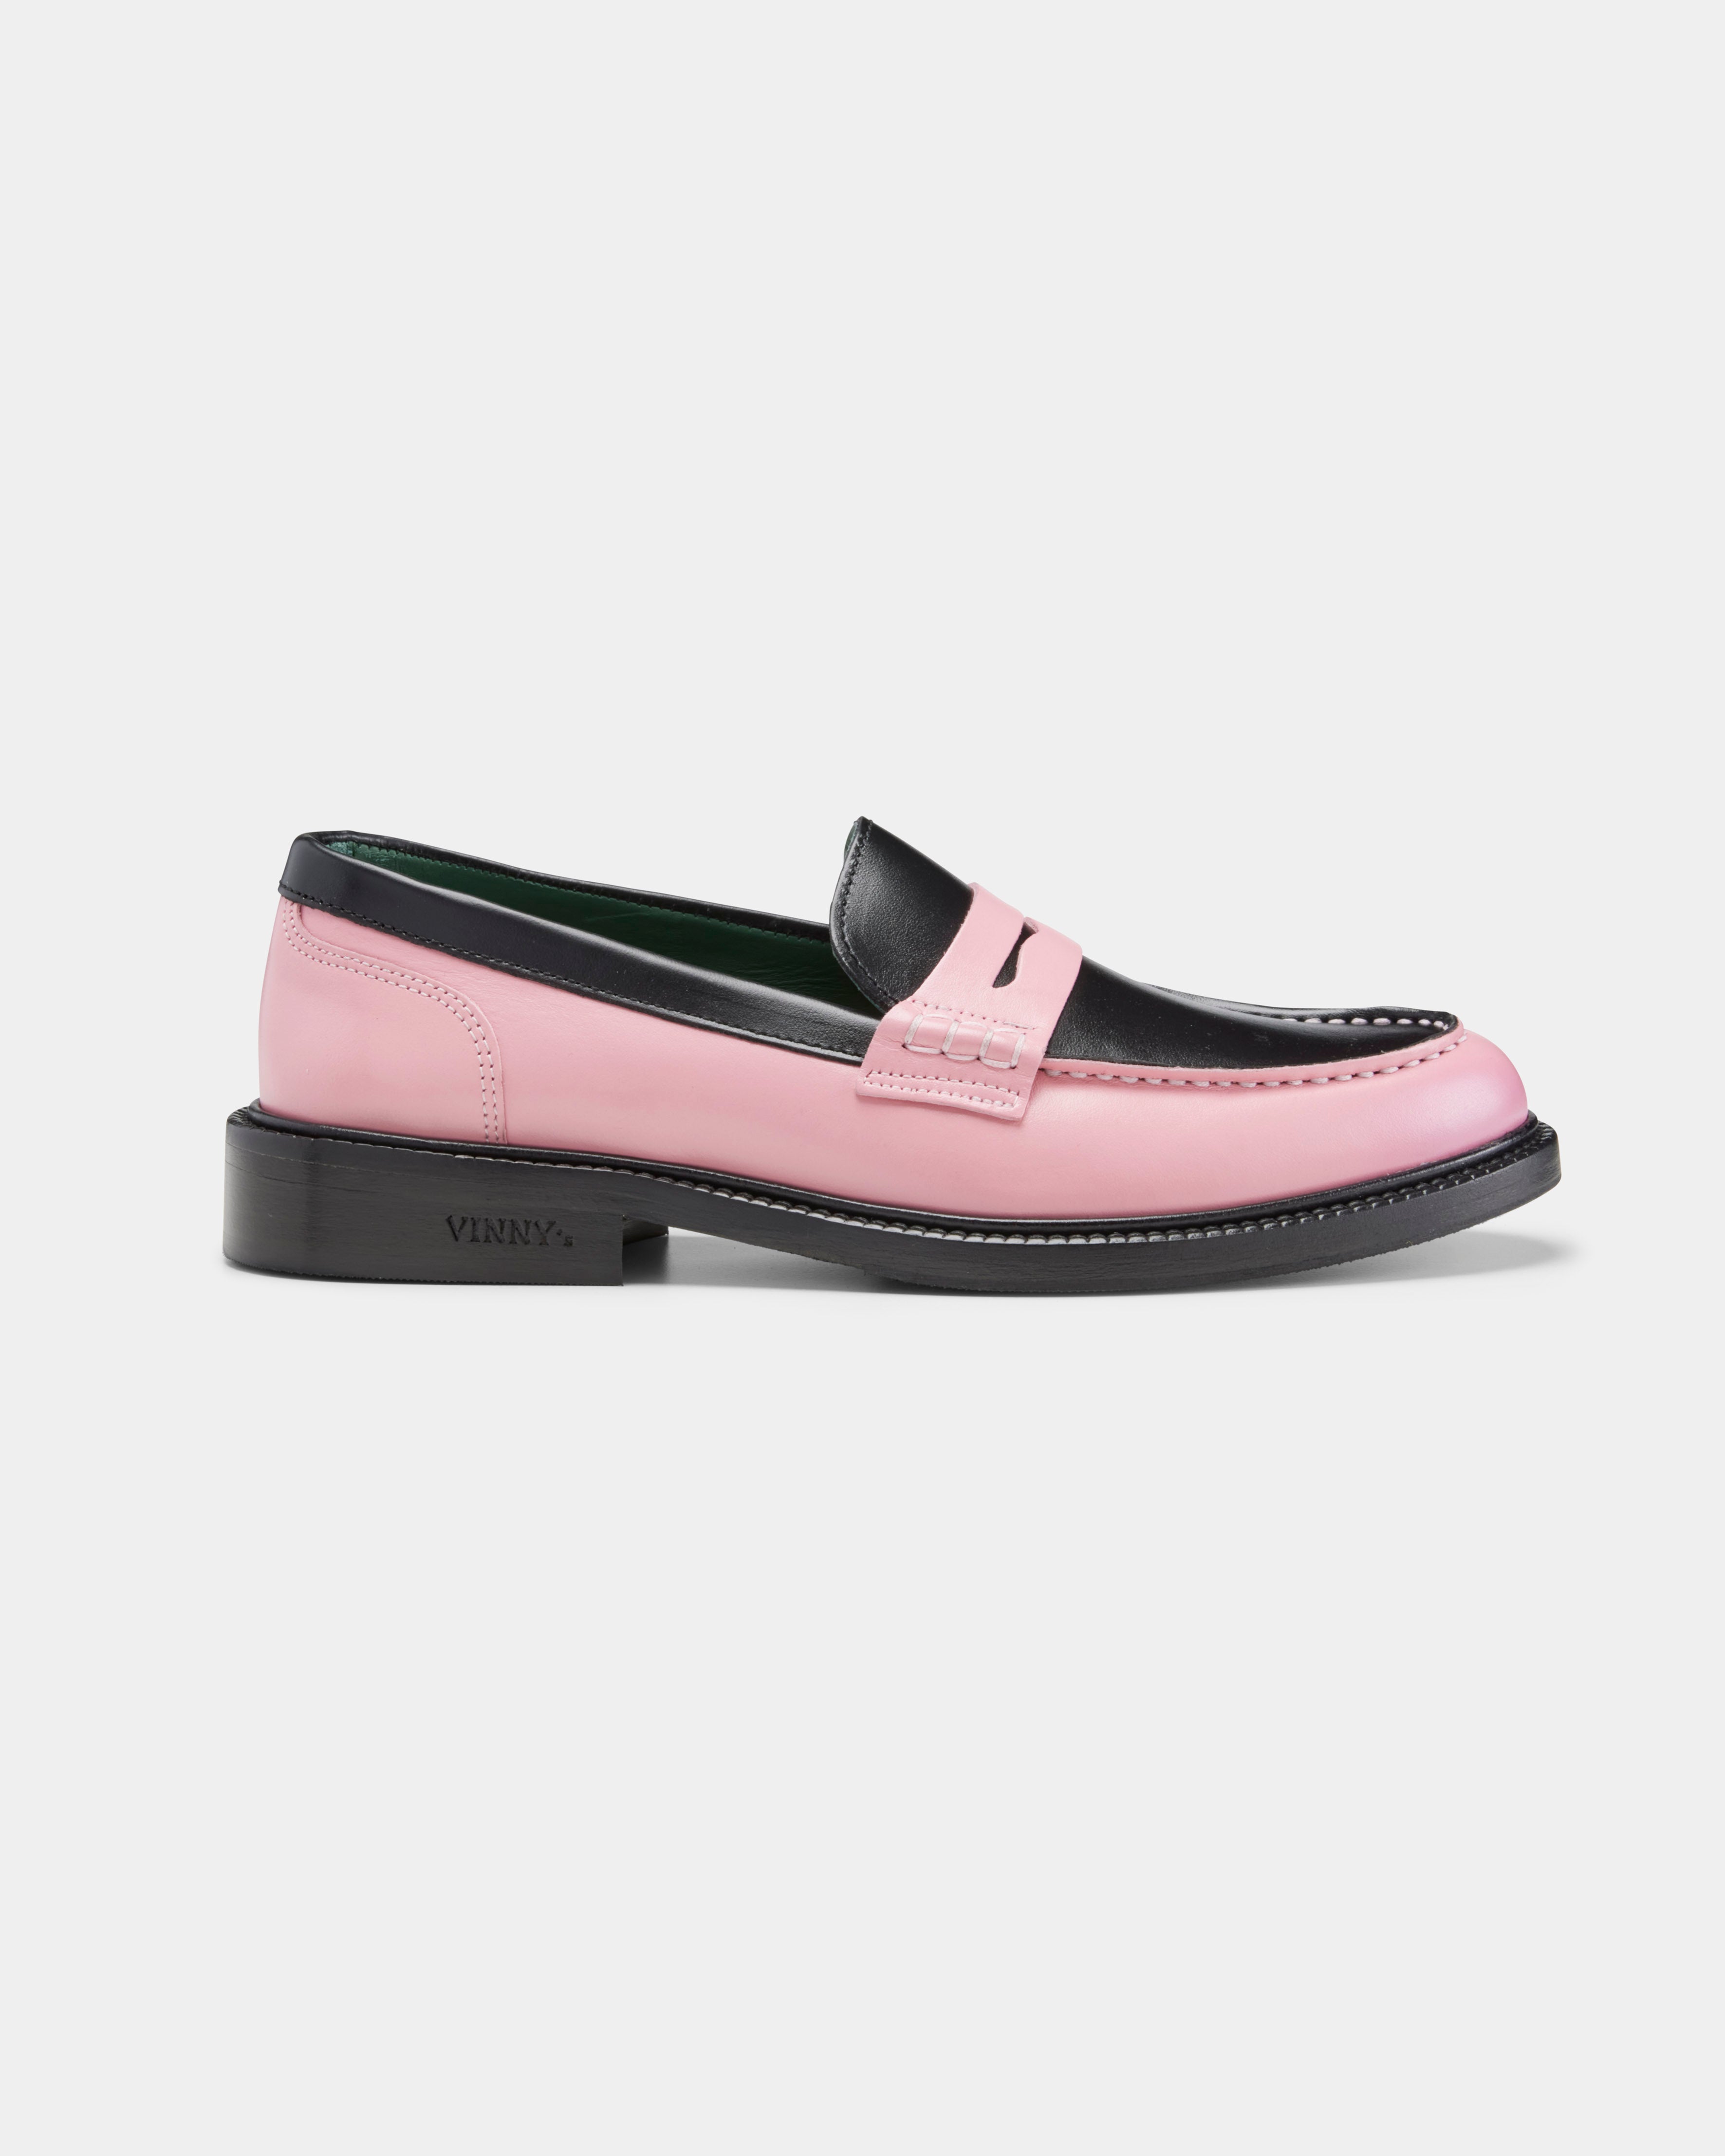 women's townee pink and black